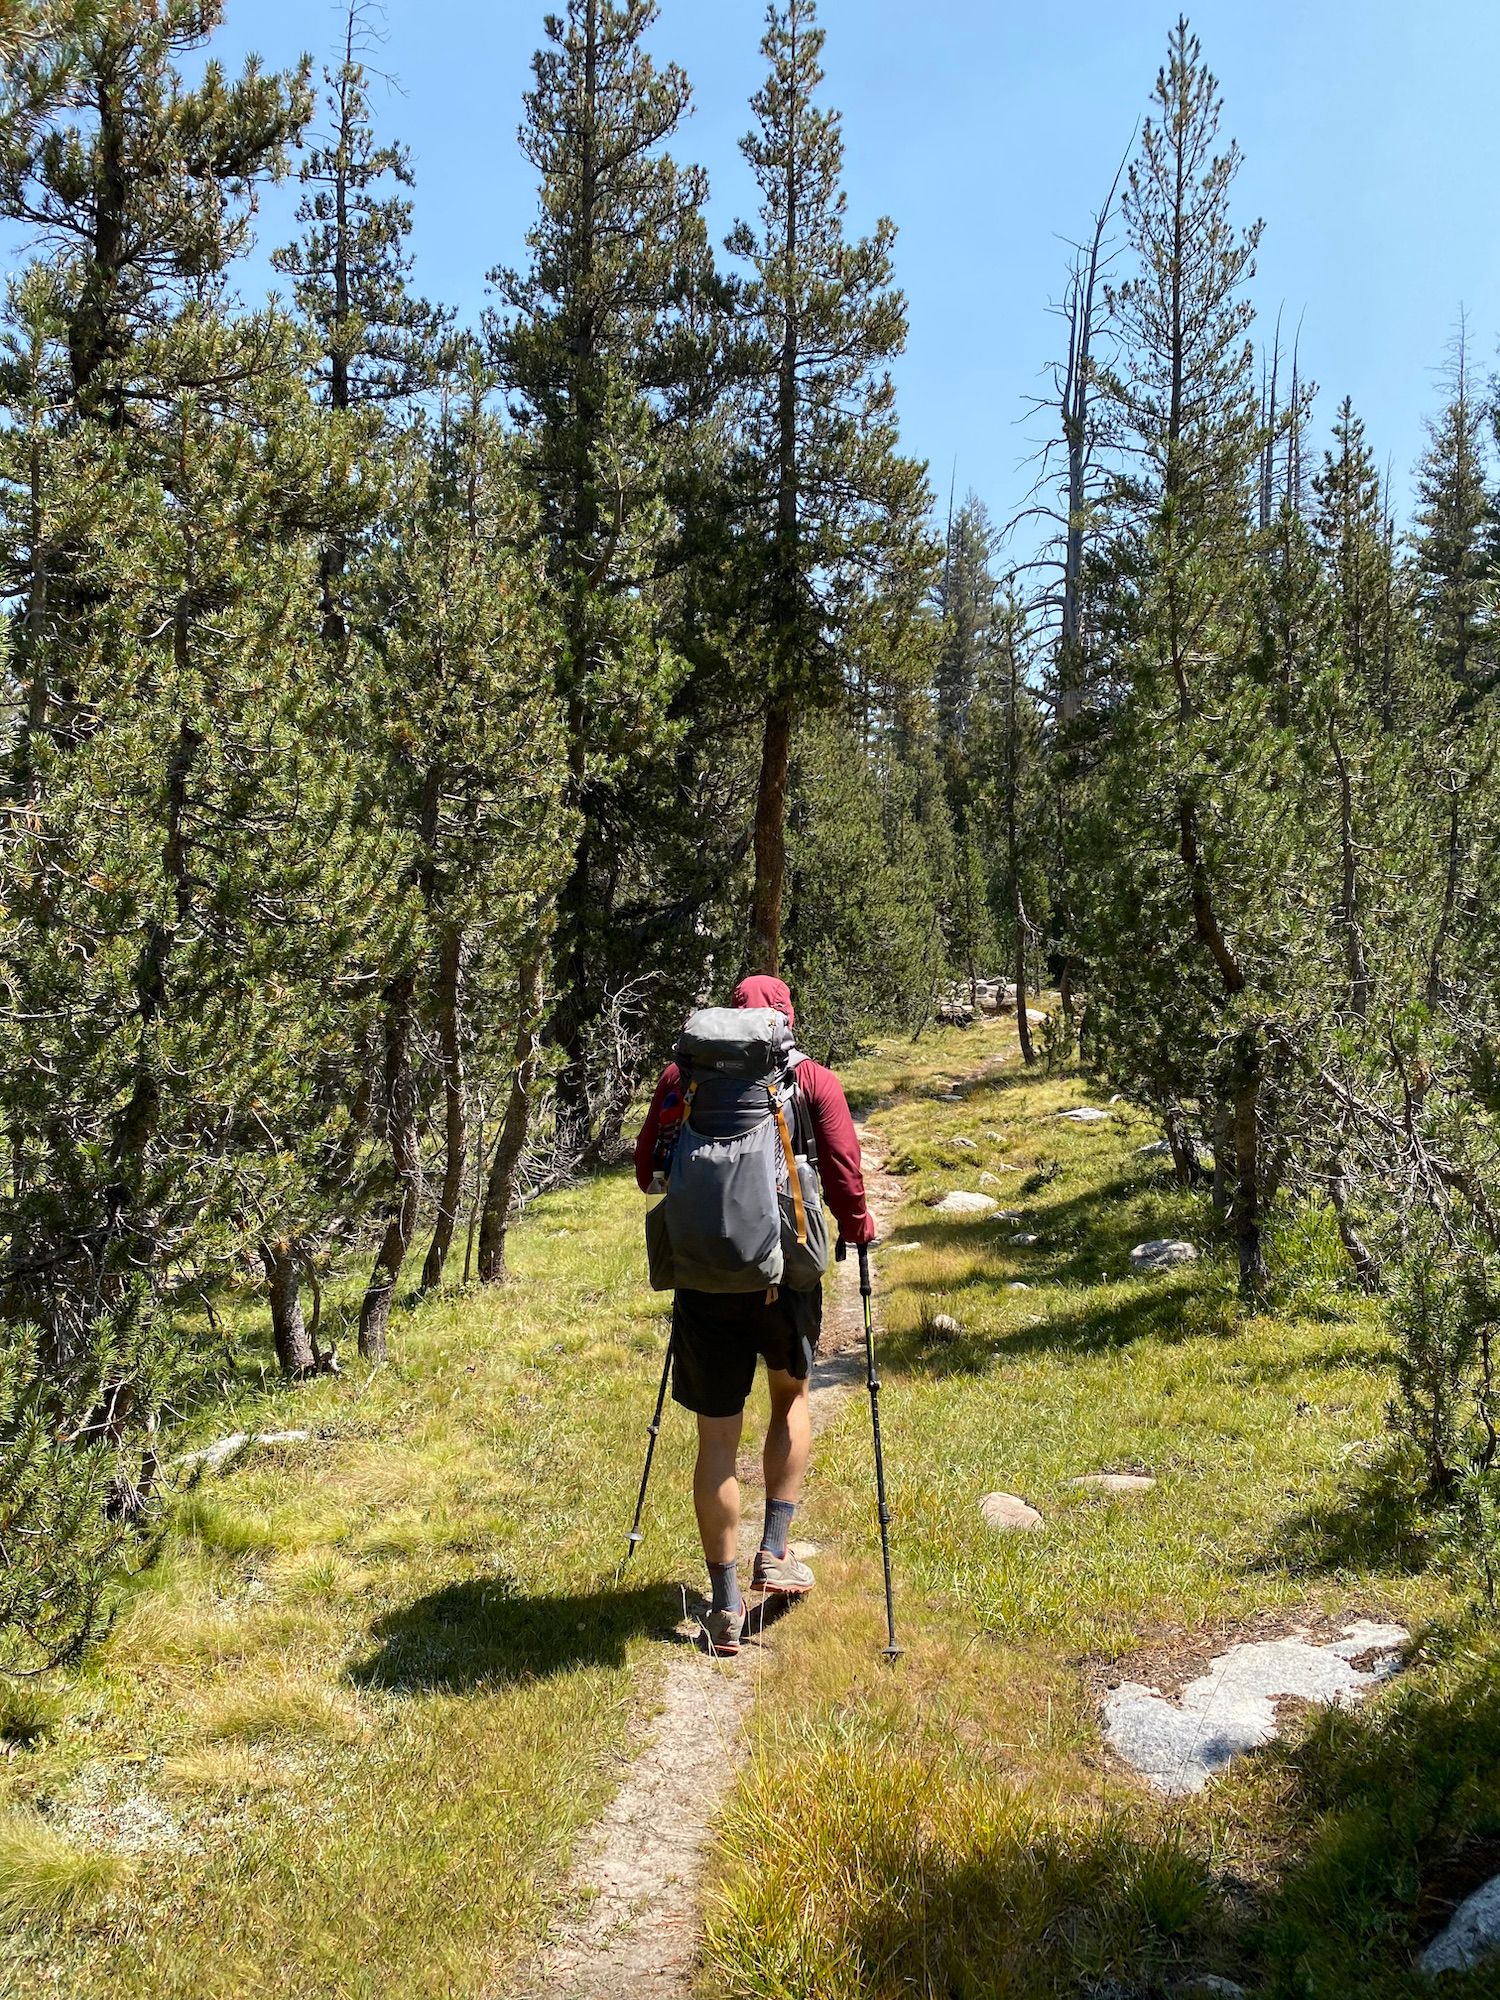 A backpacker walking along a narrow trail with pines on both sides.